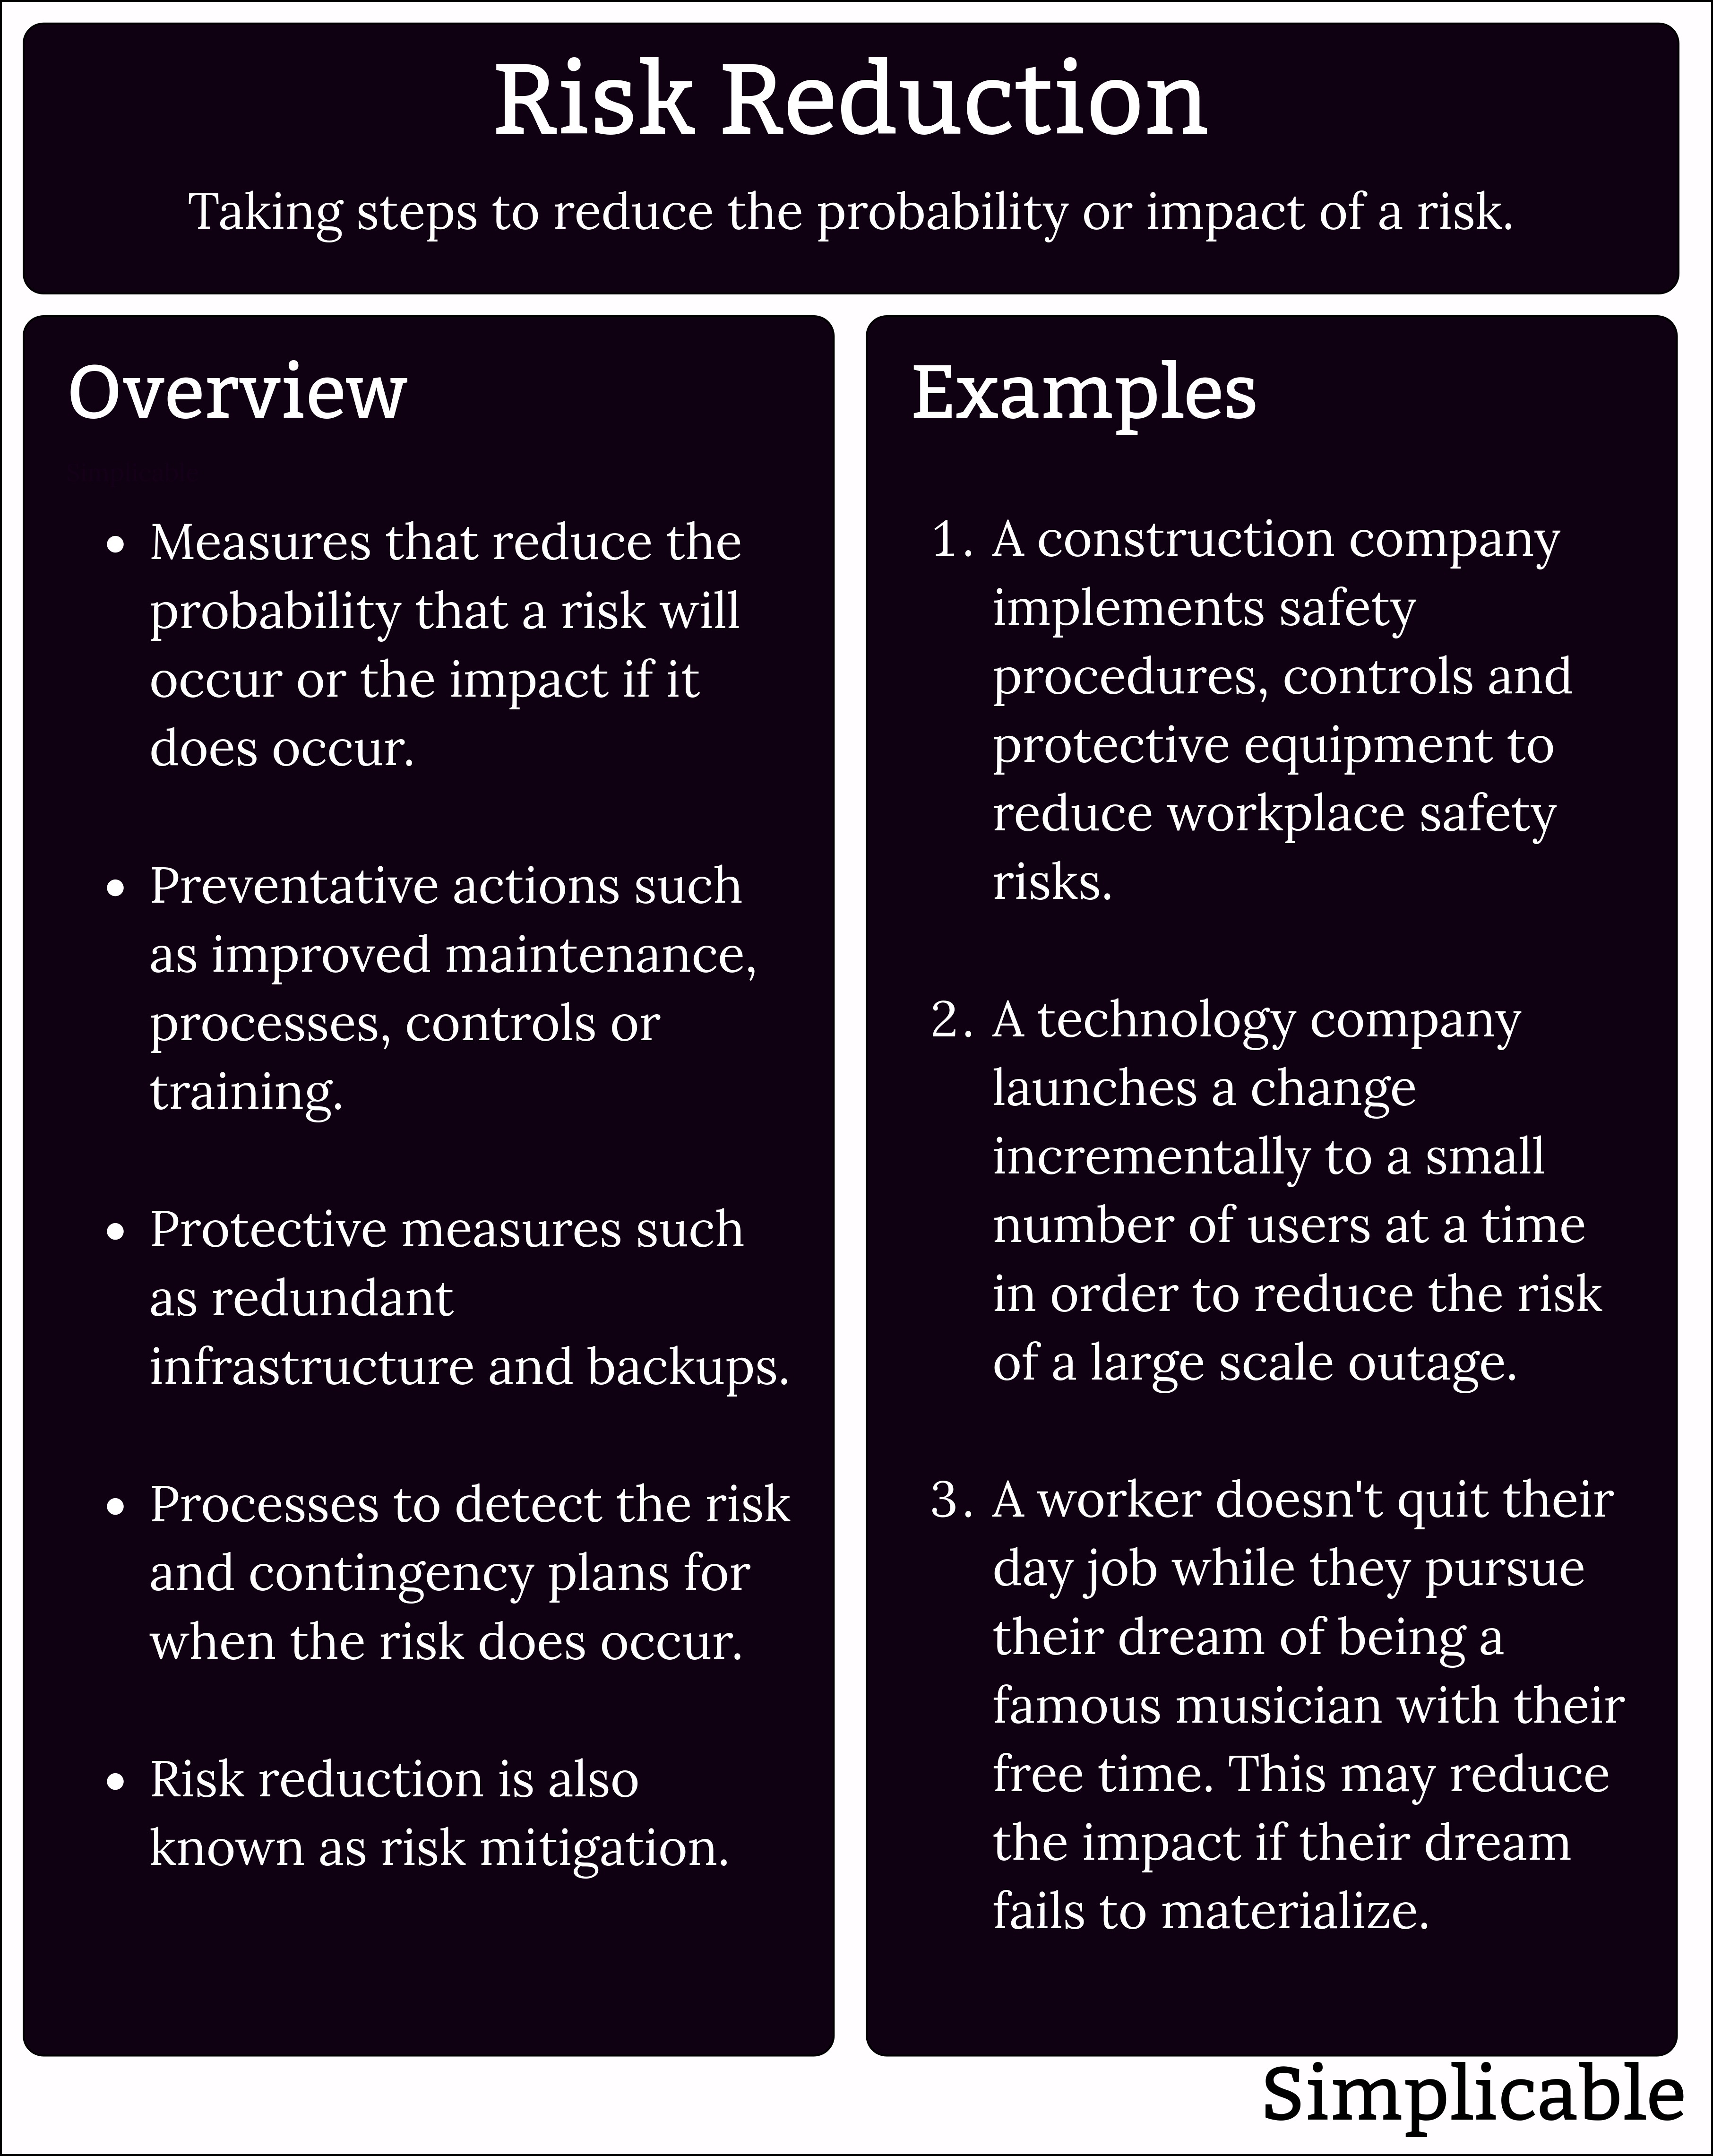 risk reduction overview and examples